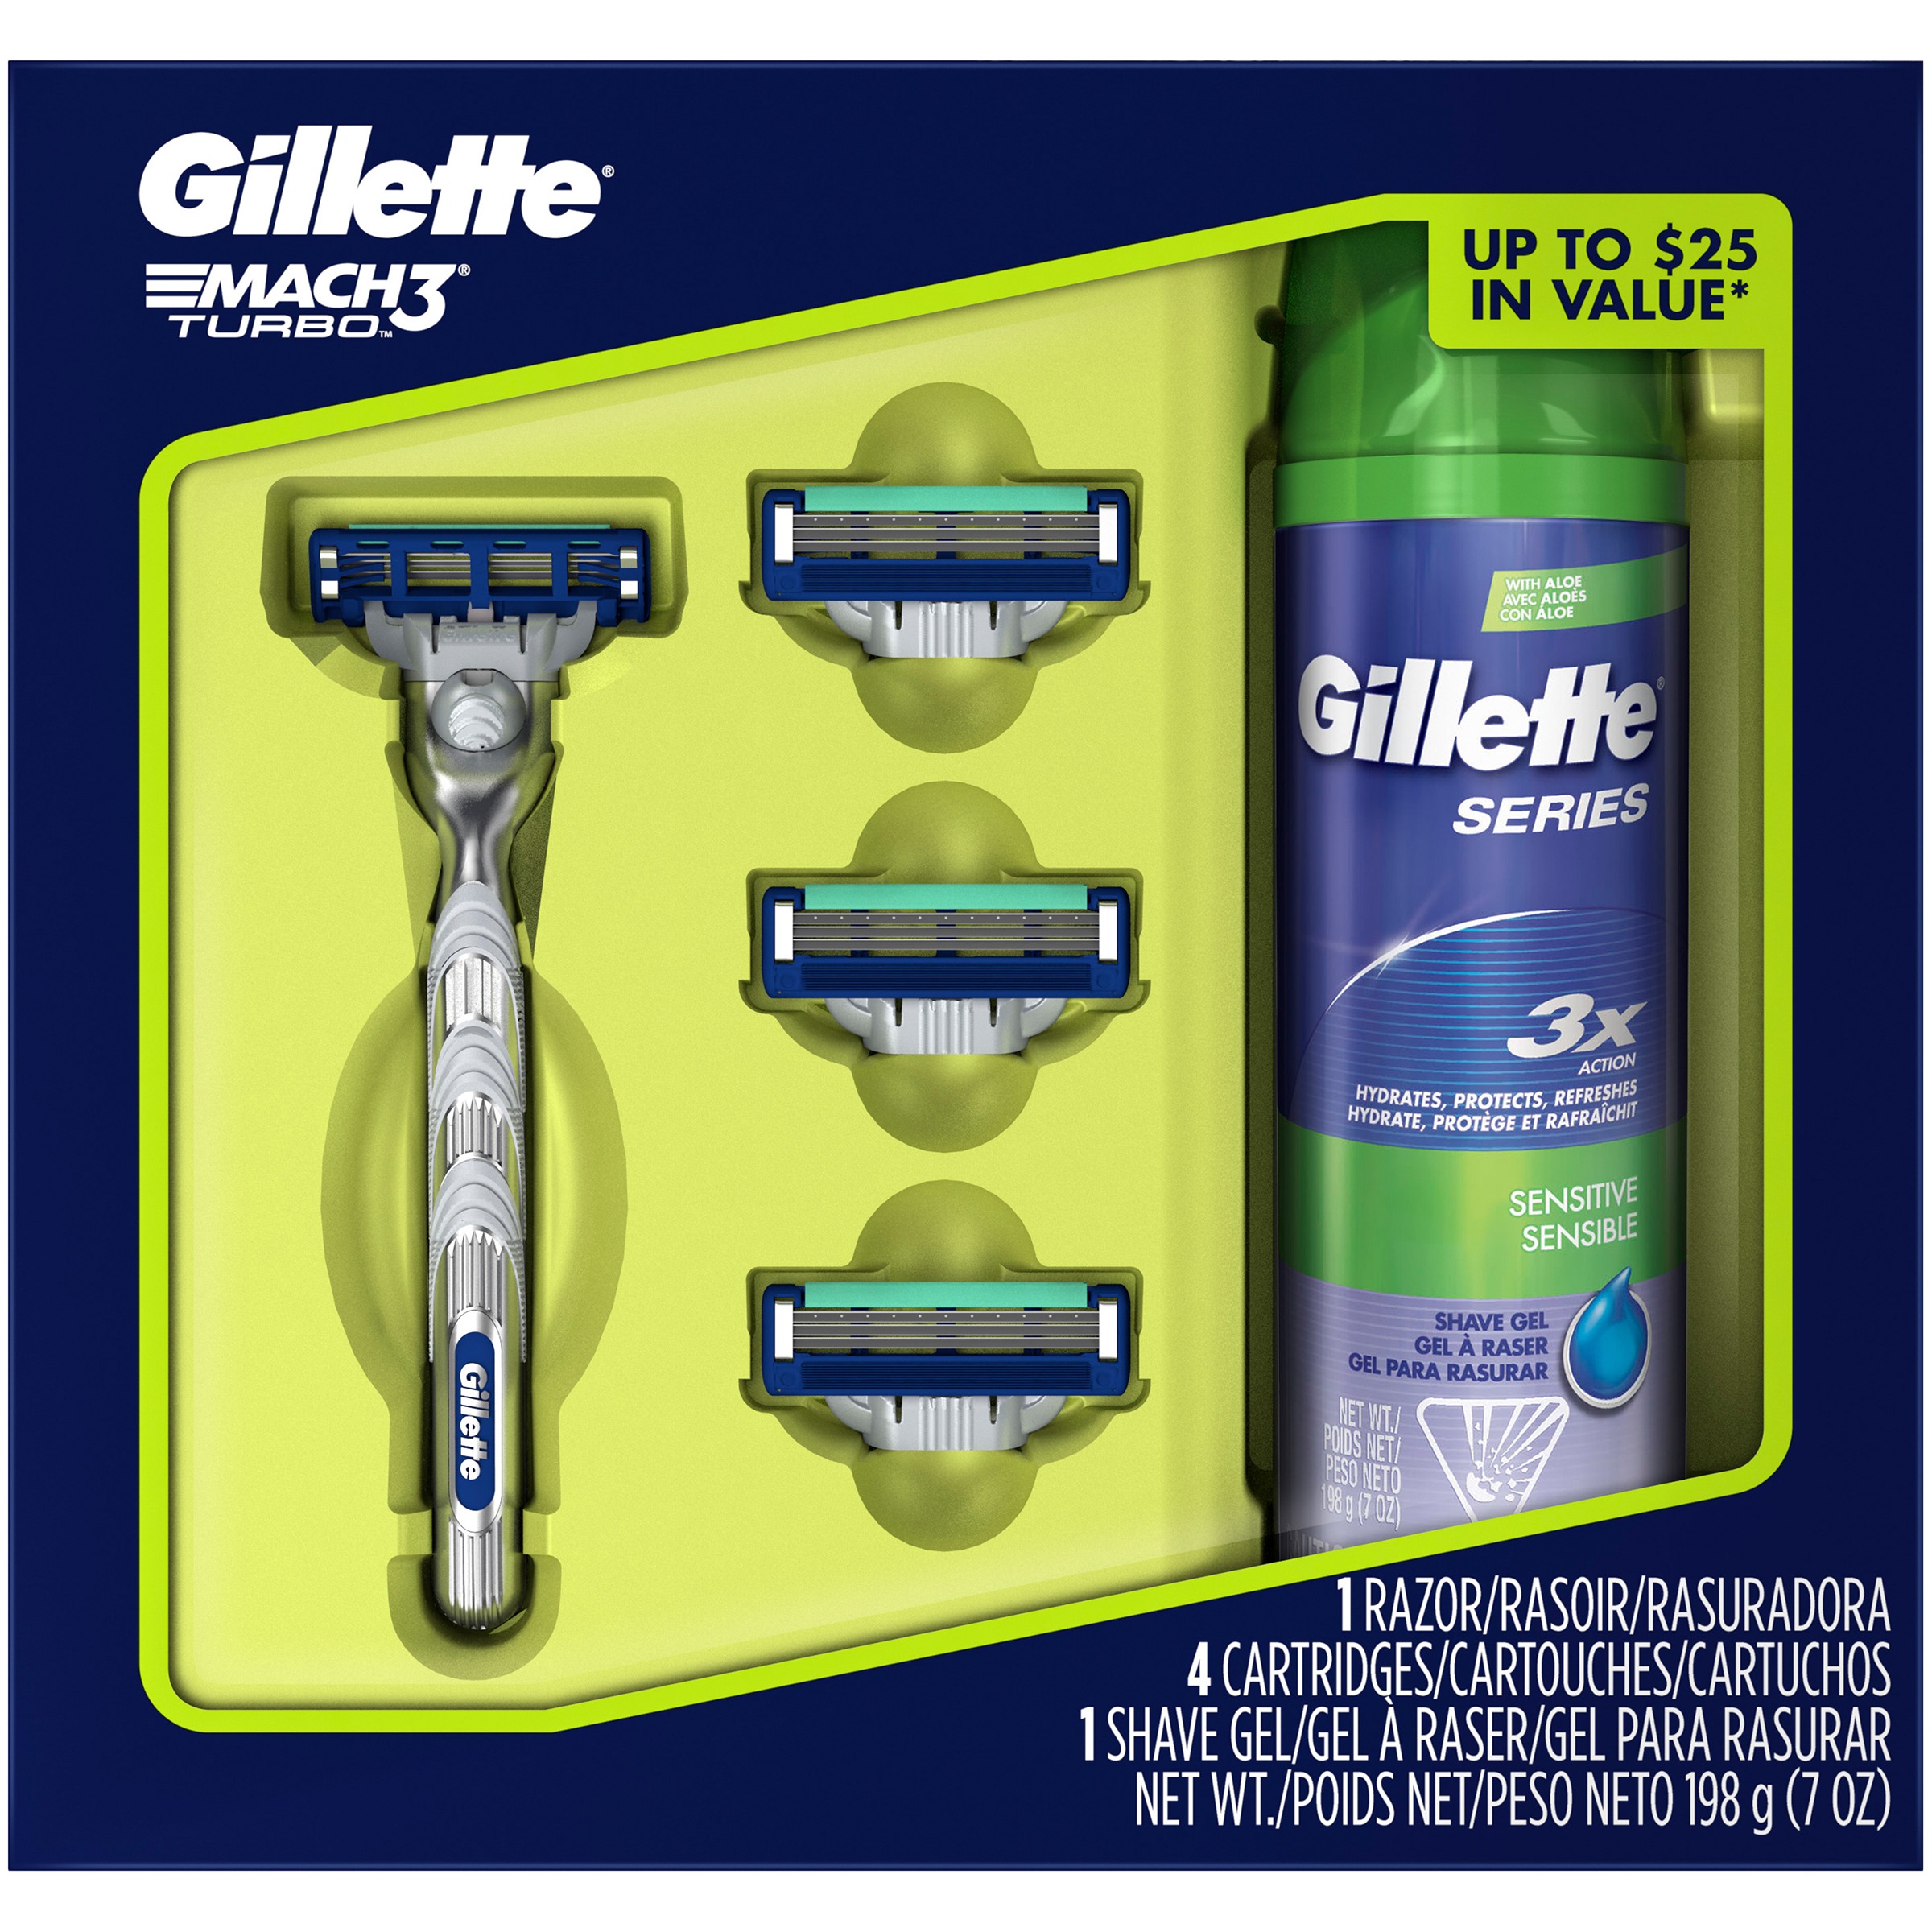 Gillette Mach3 Turbo Razor, Shave Gel and 4 Blade Refills Gift Pack - image 3 of 8